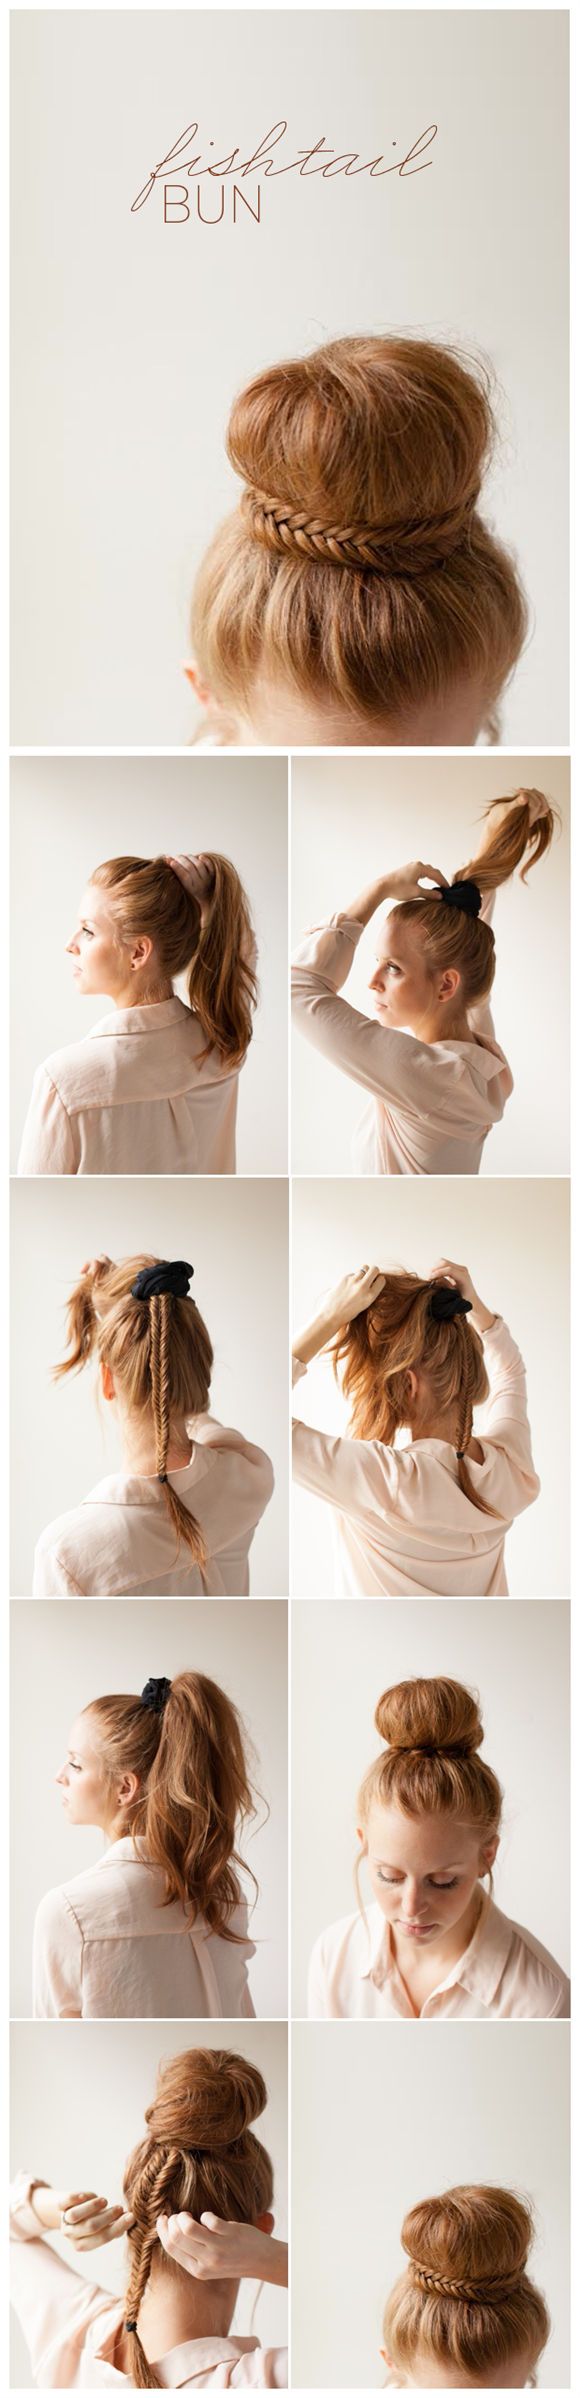 4-Cute-Hairstyles-for-Spring-Check-the-Hair-Tutorials-Here.jpg